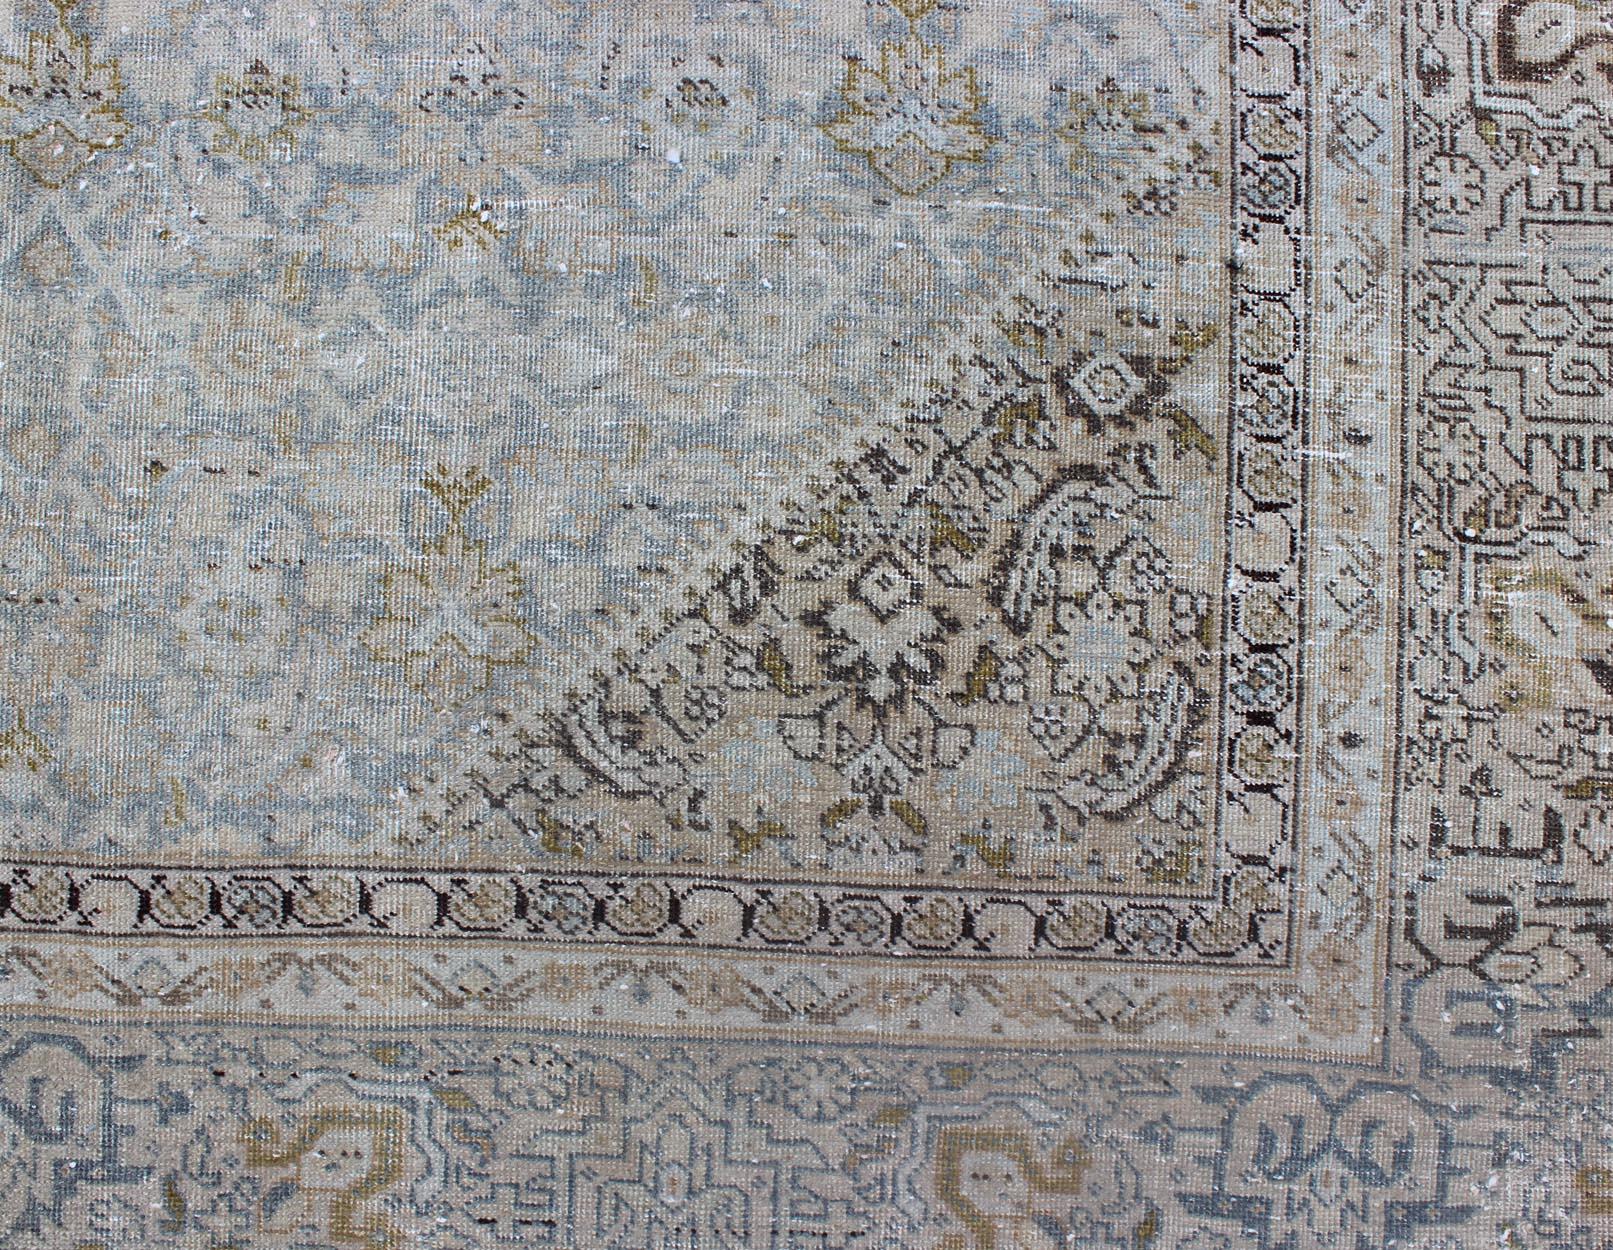 Wool Antique Persian Tabriz Rug with Medallion in Light Blue, Tan and Brown Colors